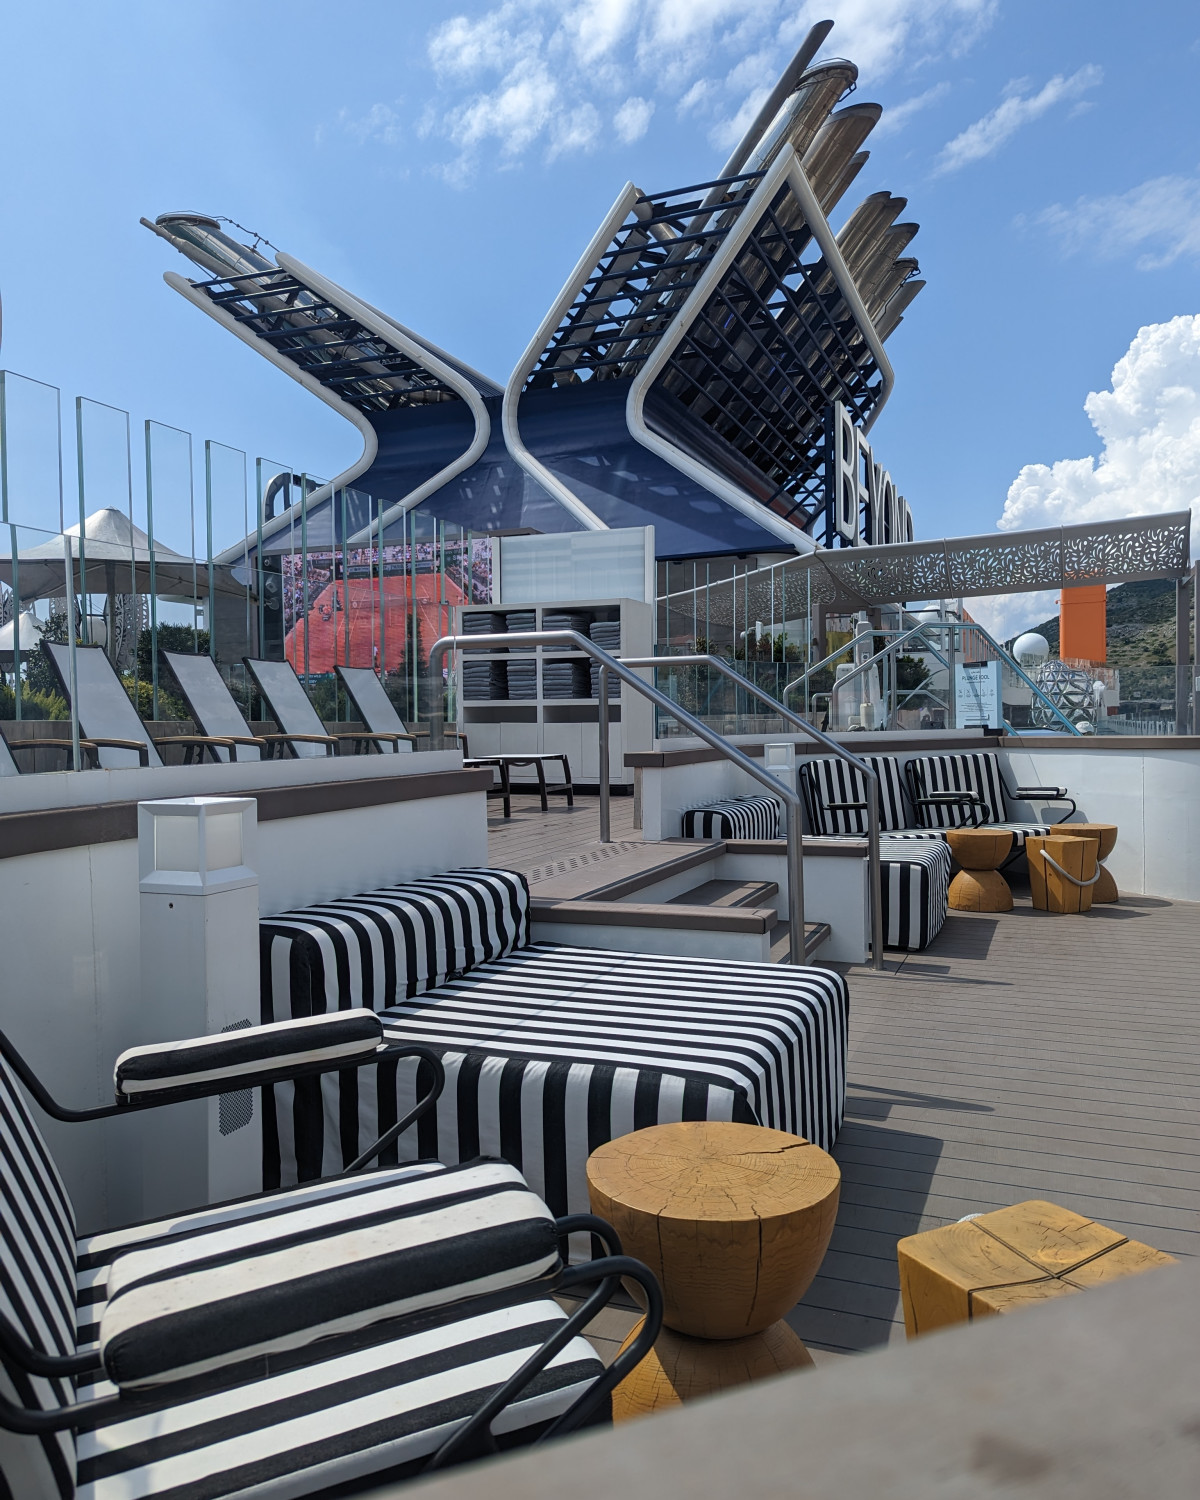 Deck of the ship with resting chairs and tables